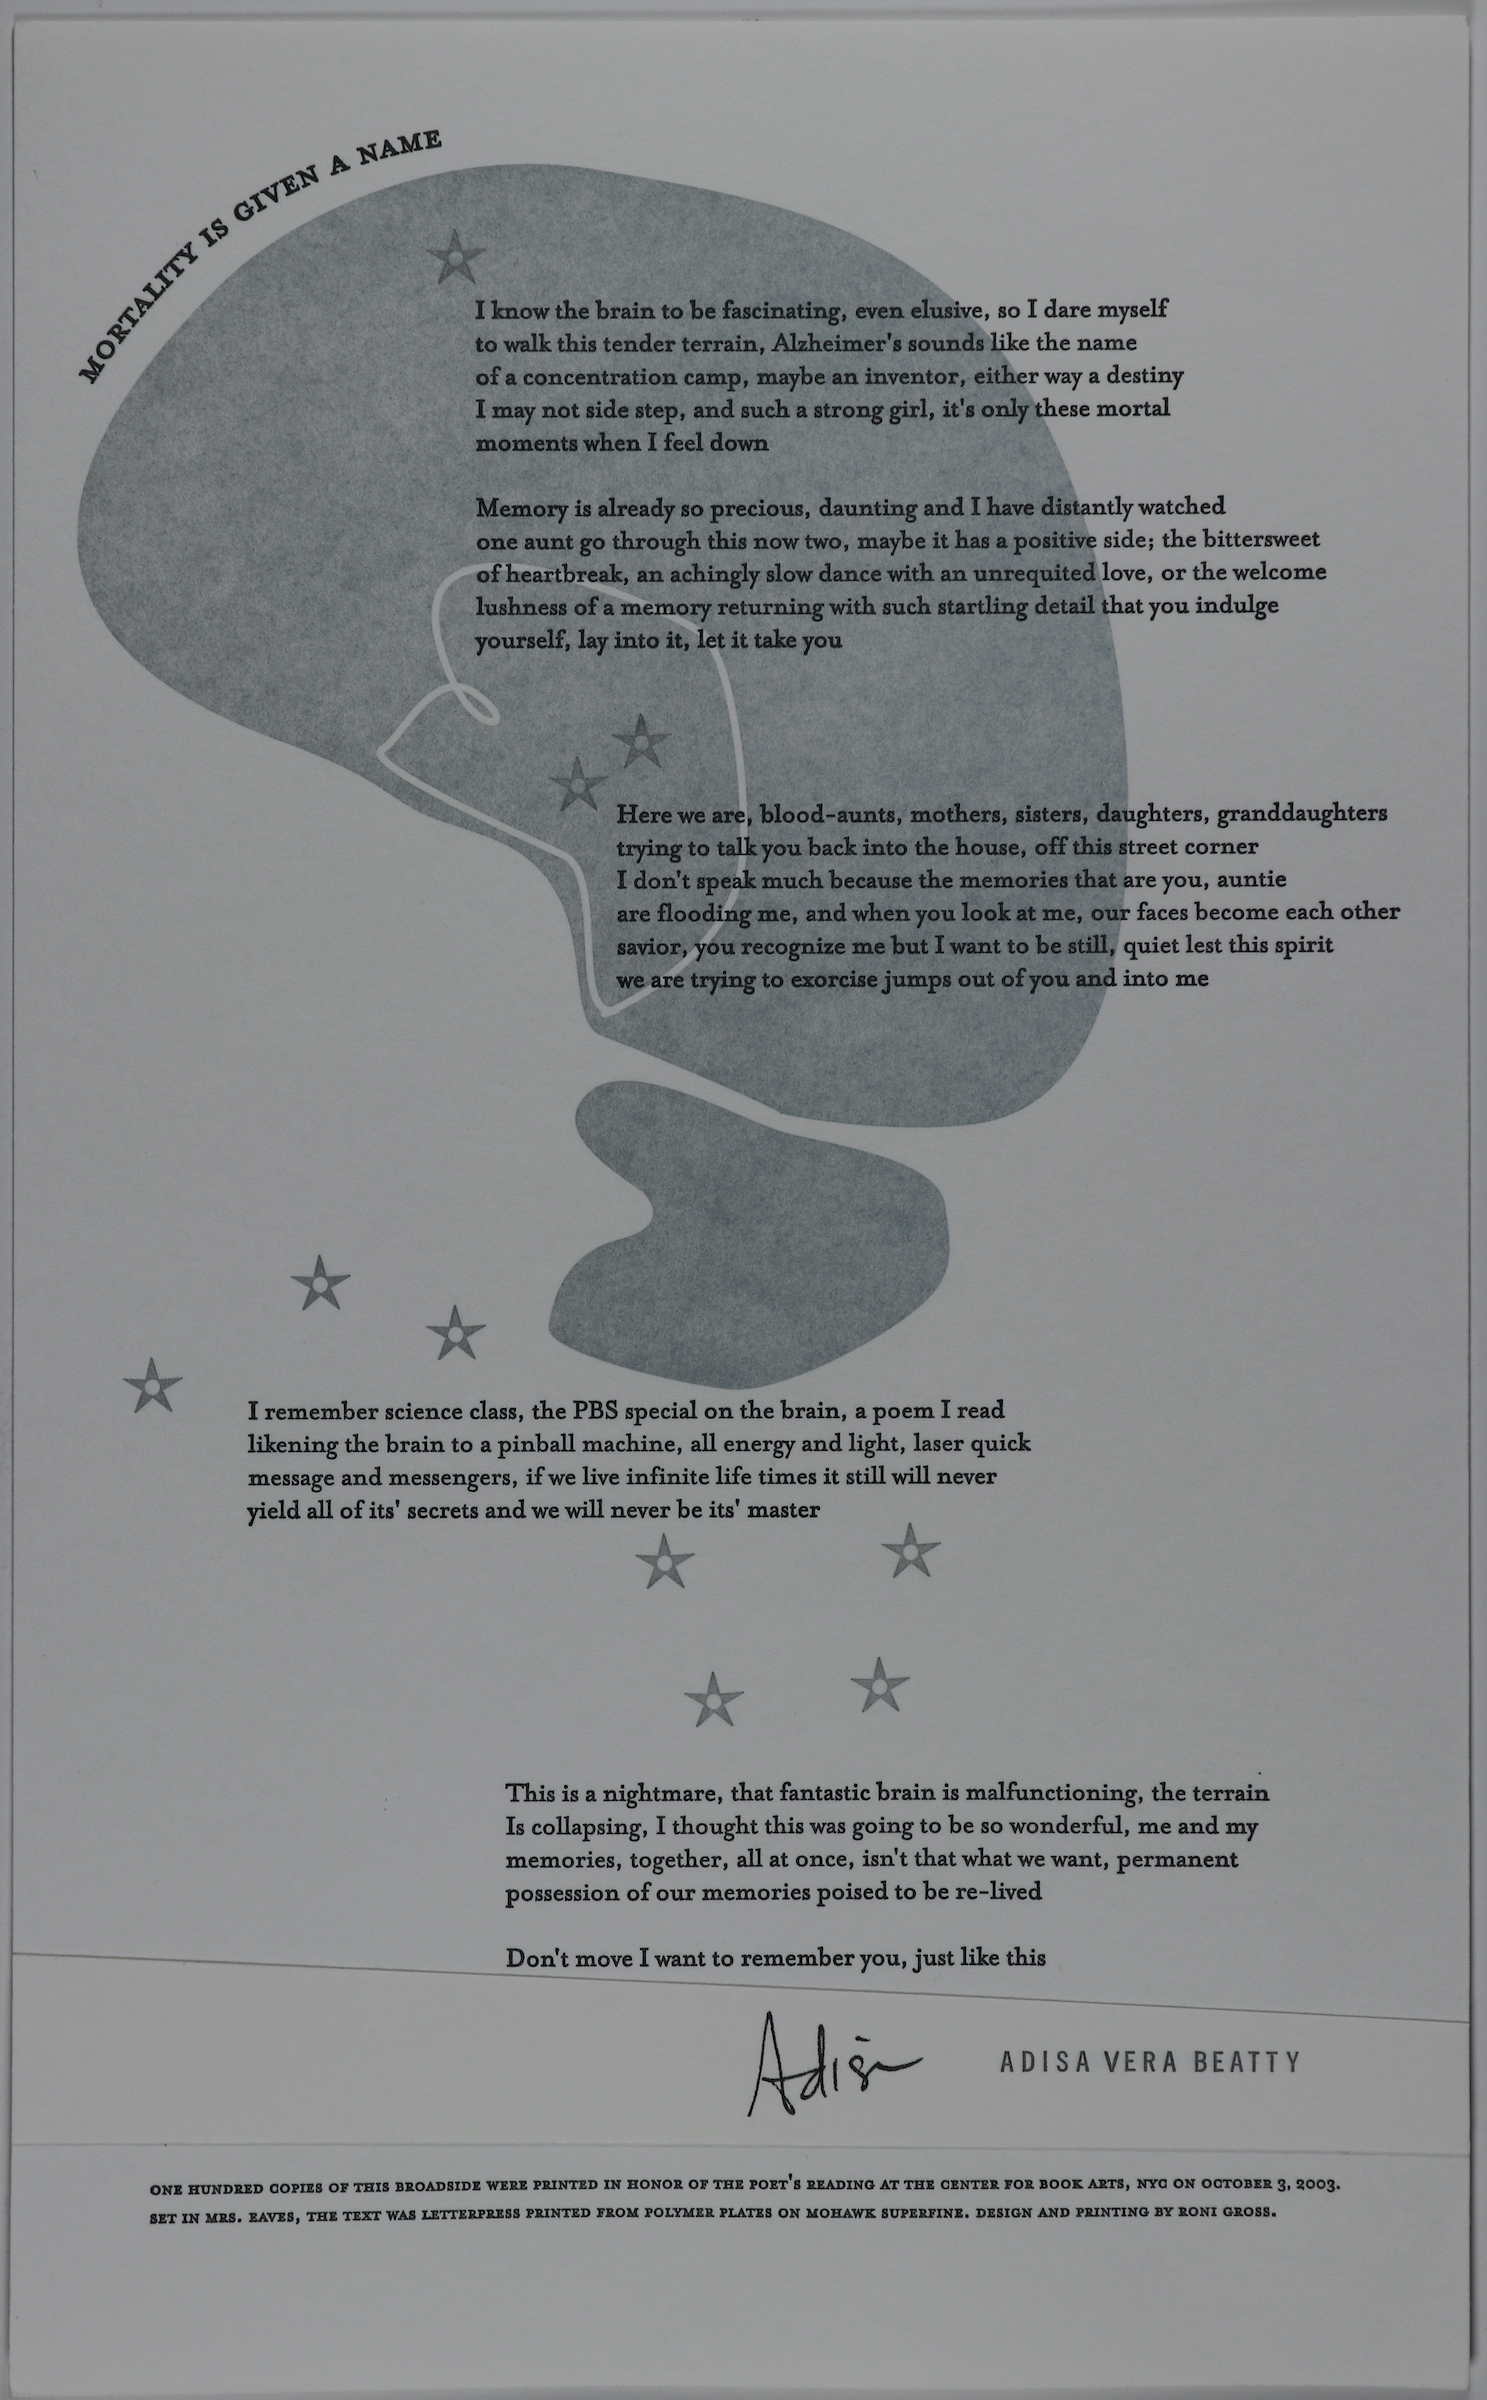 This broadside is long horizontally, with a white background and gray design behind the text. The design is drawn to look like a light bulb, hovering in the air with stars below it. The design is large in size and takes up a good portion of the broadside. There is a smaller white outline in the “bulb” that represents the interior of a lightbulb. The text itself is black in color, some of it covering over the design, while the rest follows to the bottom half of the broadside. The text is formatted into five paragraphs total on the broadside.